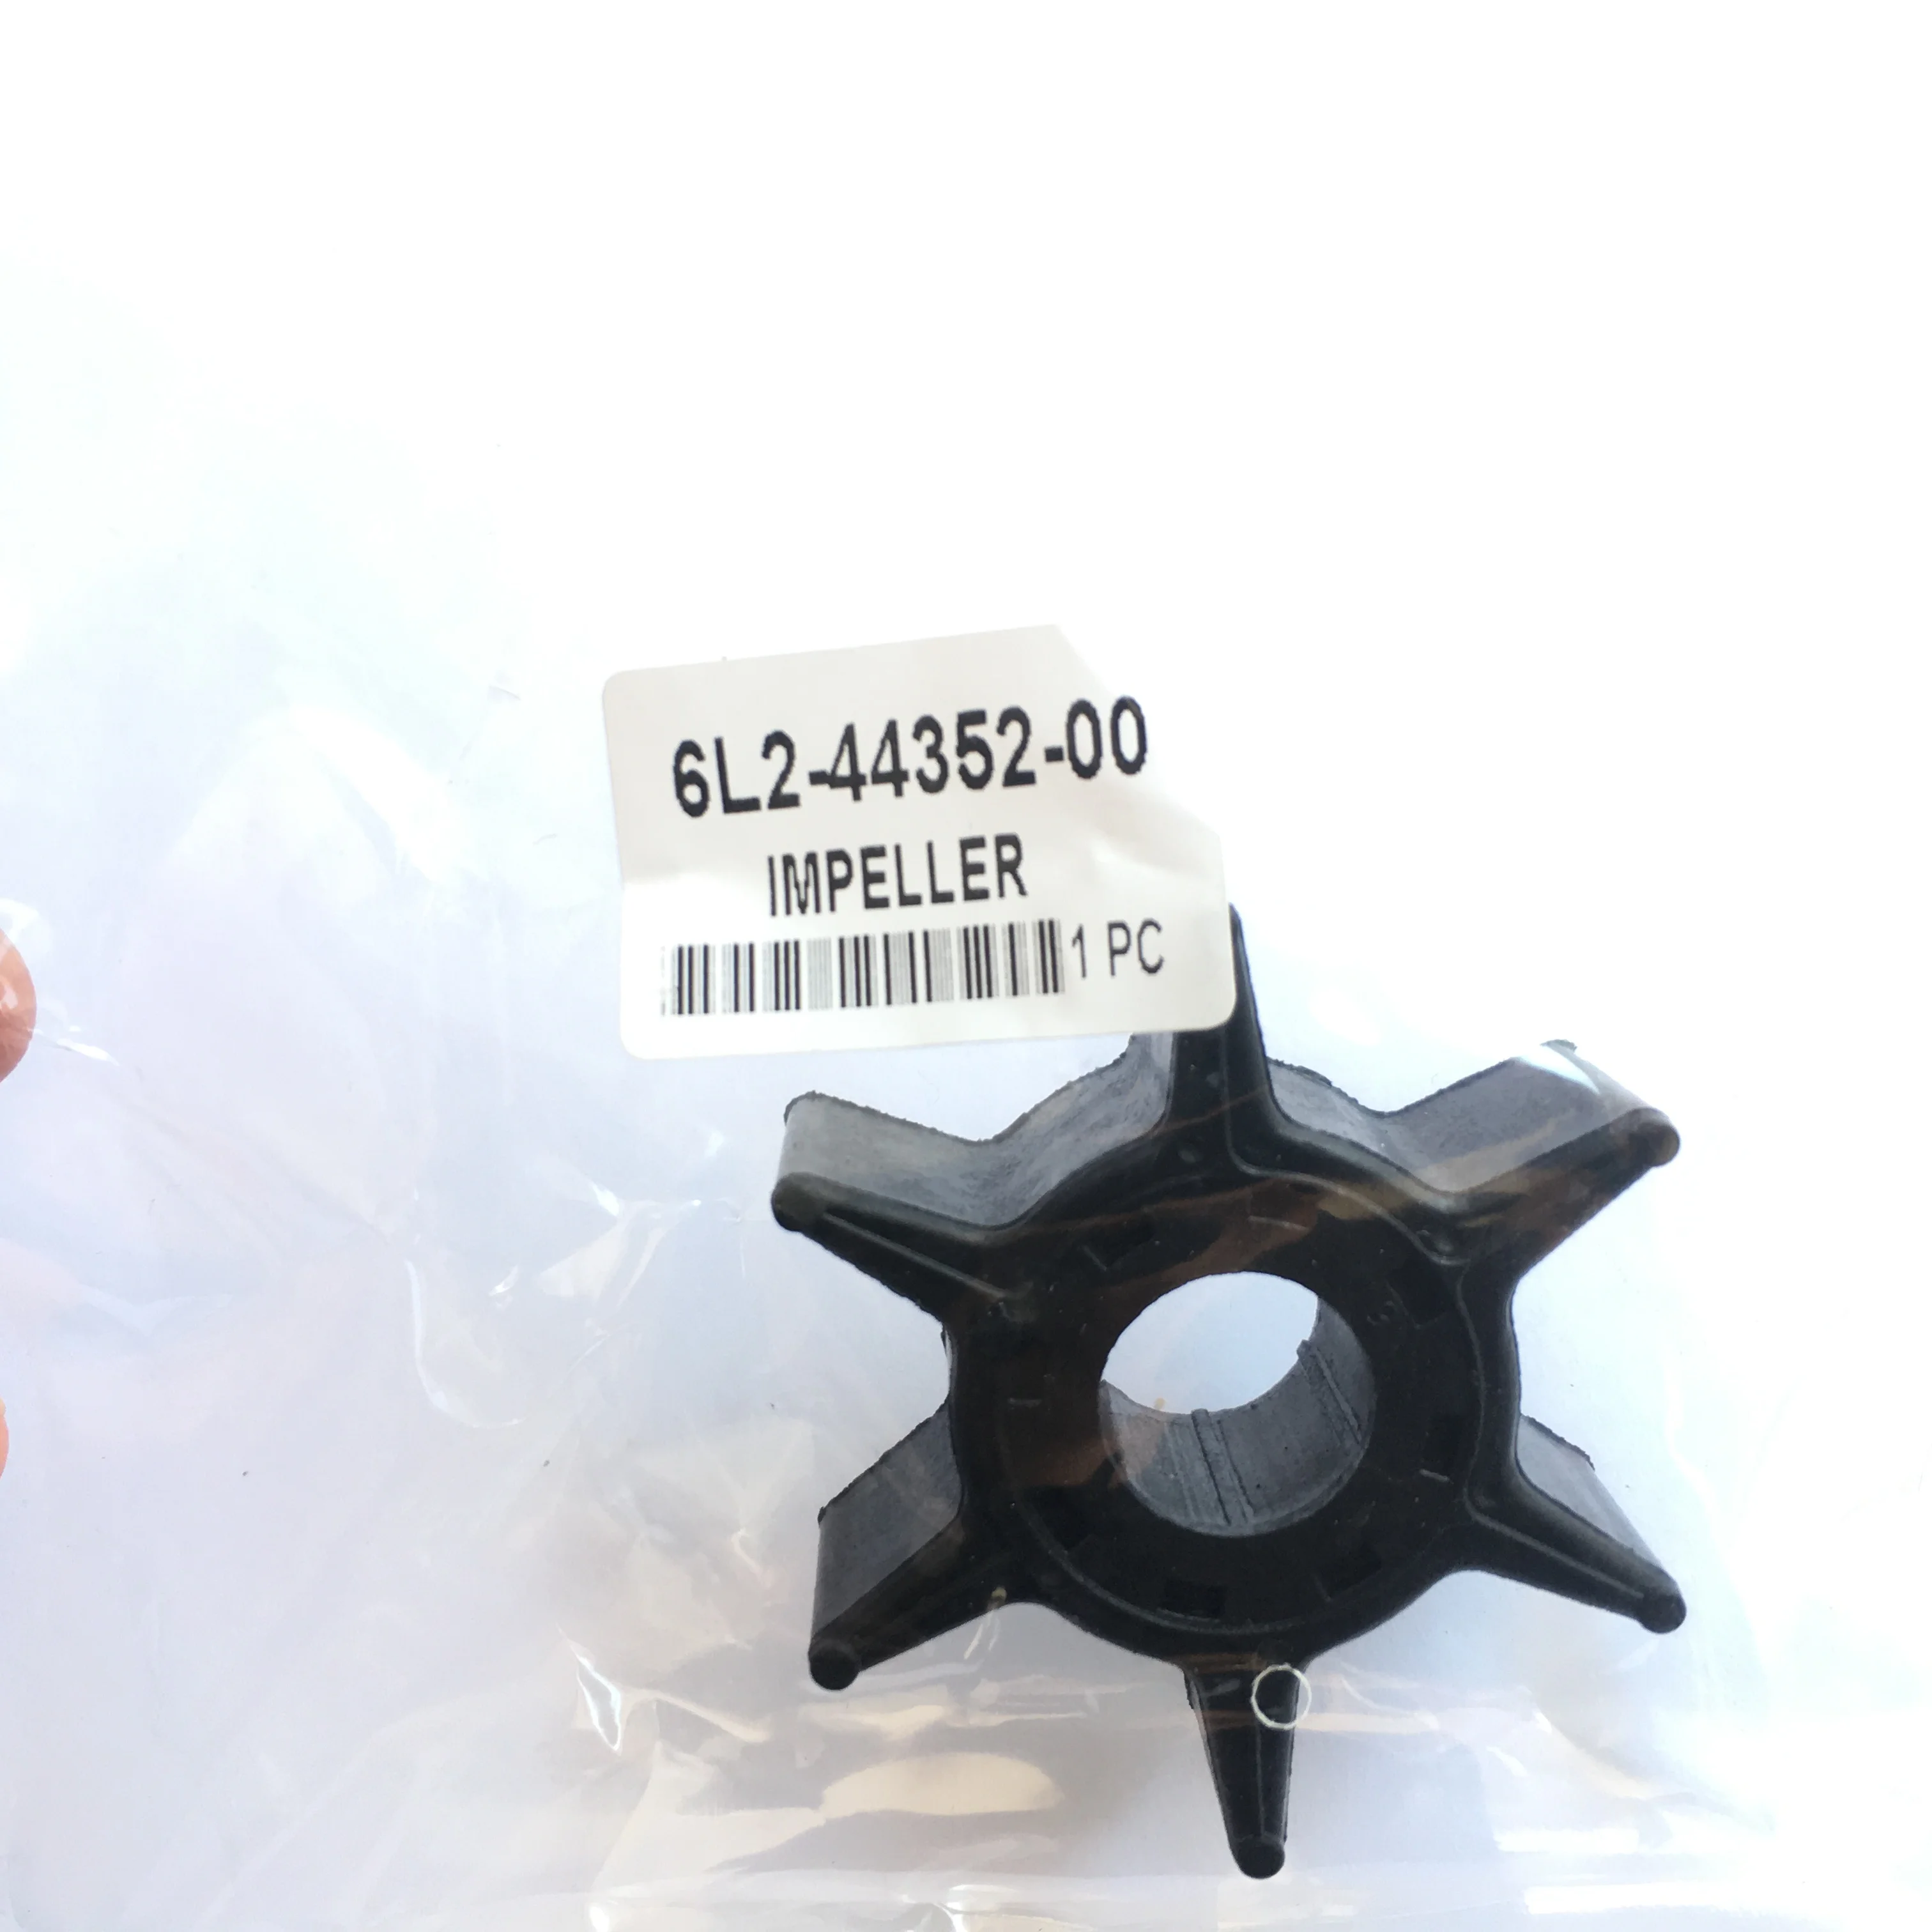 

6L2-44352-00 18-3065 Impeller for Yamaha2-stroke 20hp 25hp Outboard Motor Water Pump ,Free Shipping